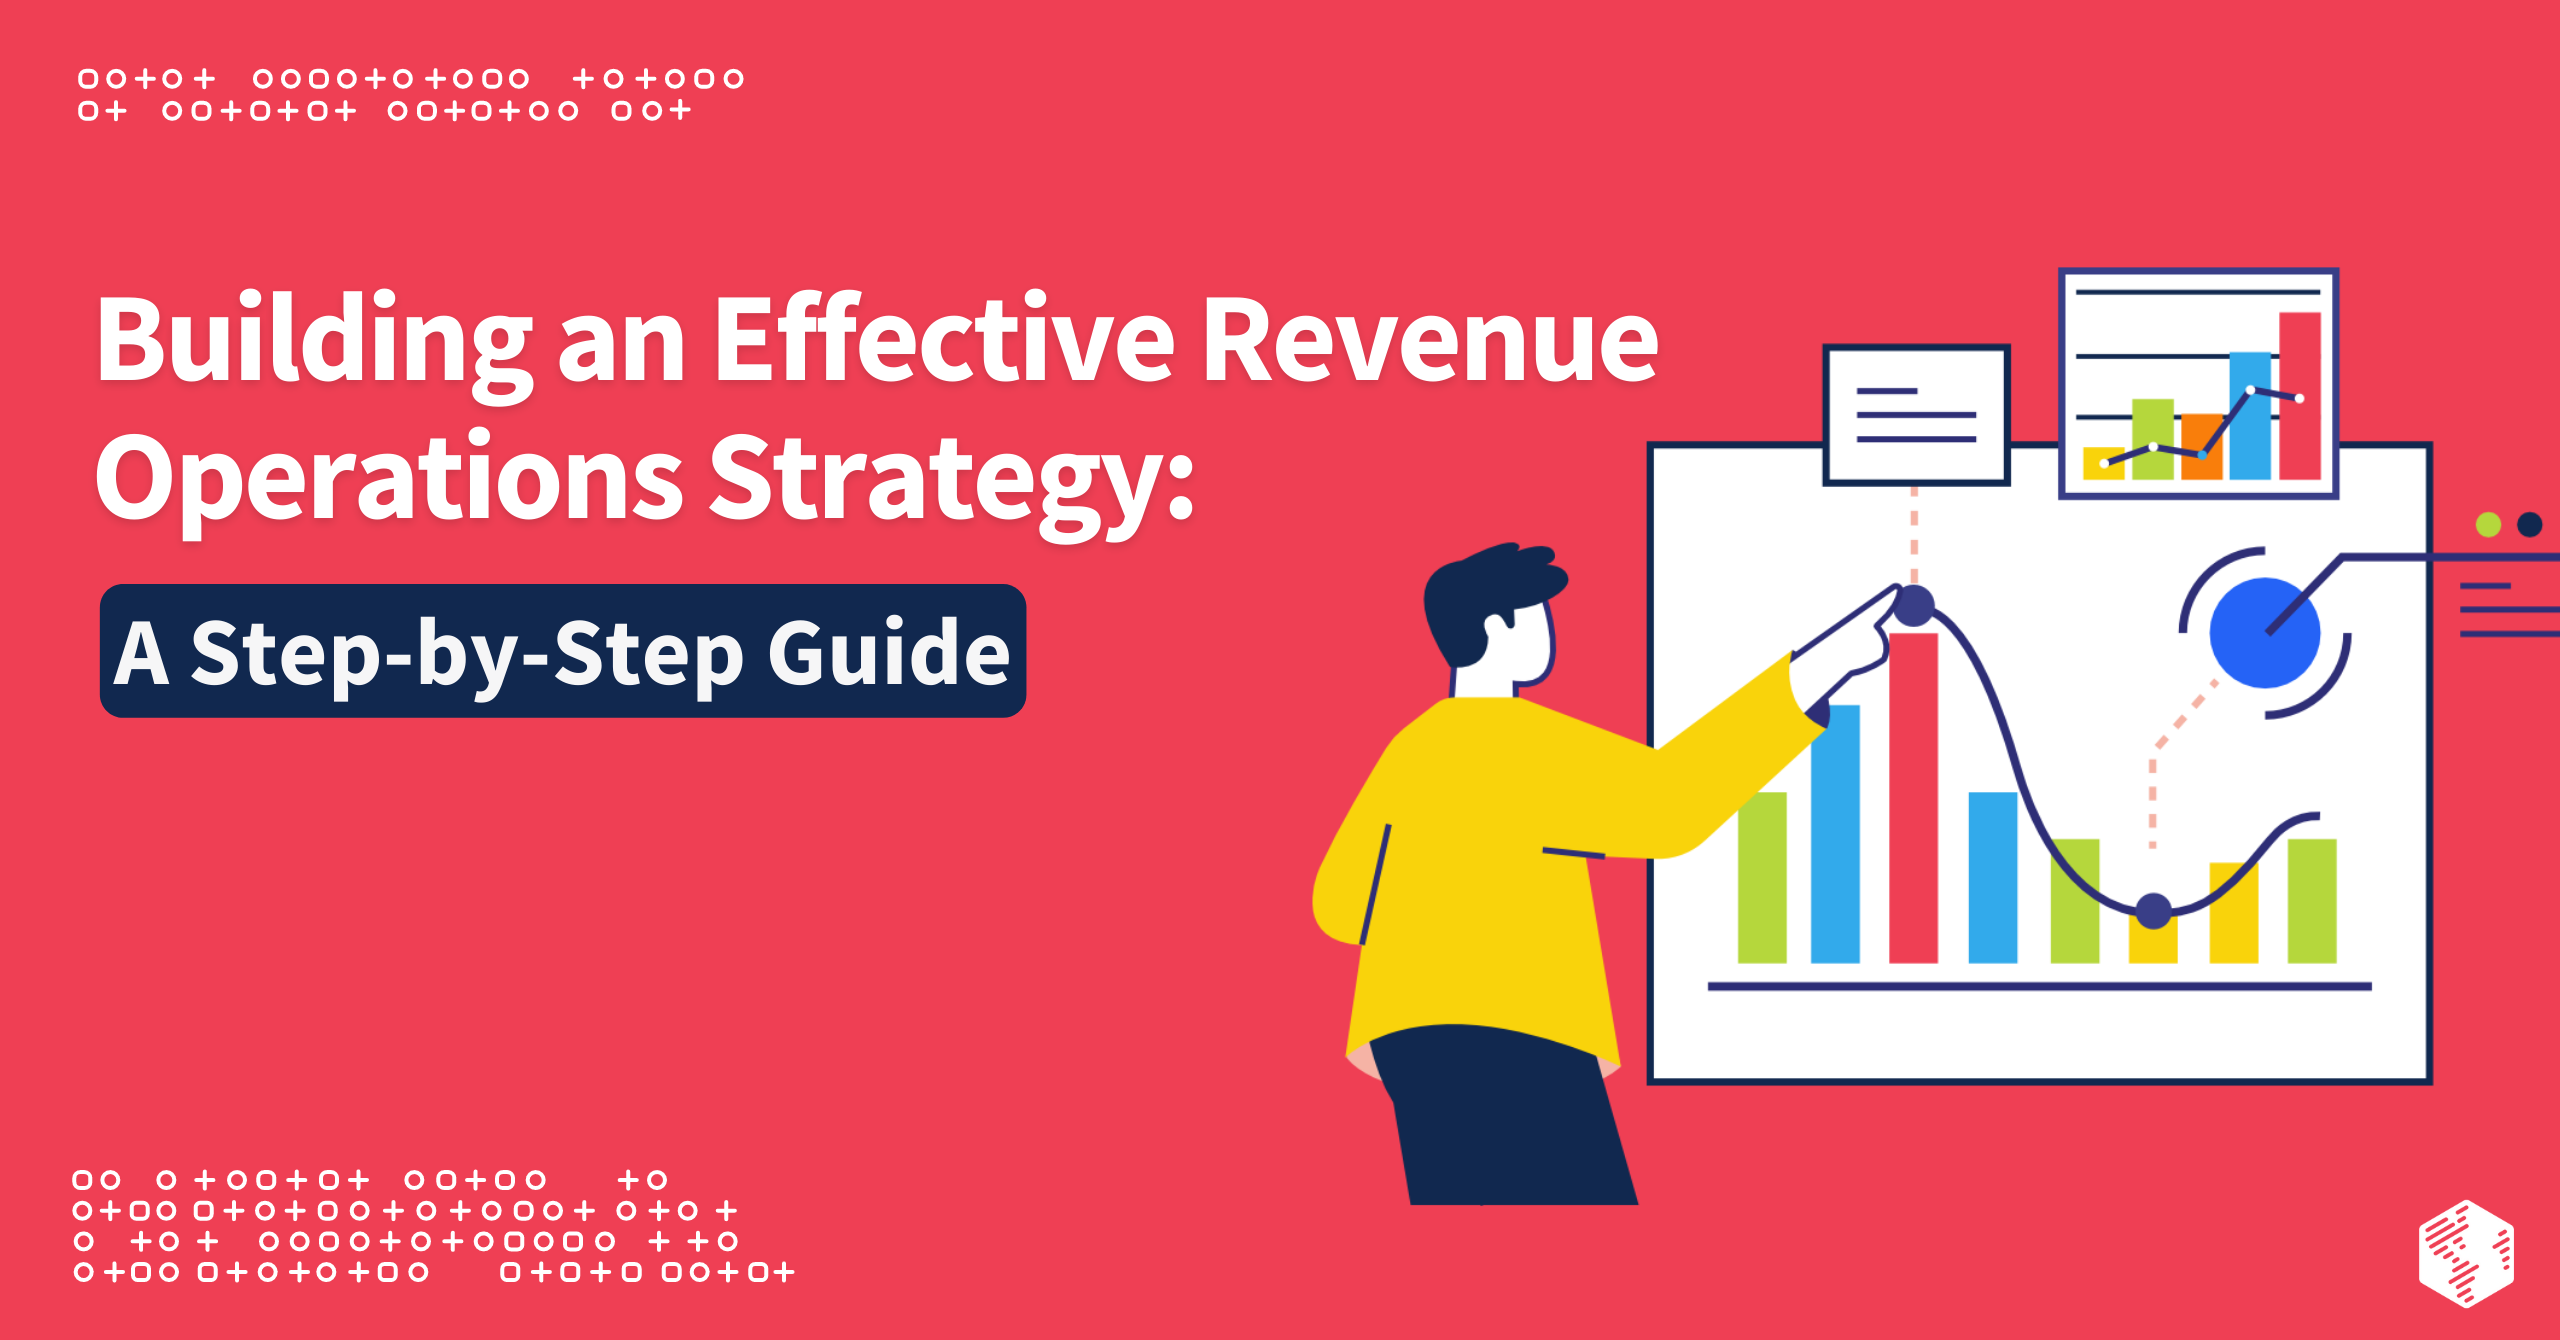 Building an Effective Revenue Operations Strategy: A Step-by-Step Guide